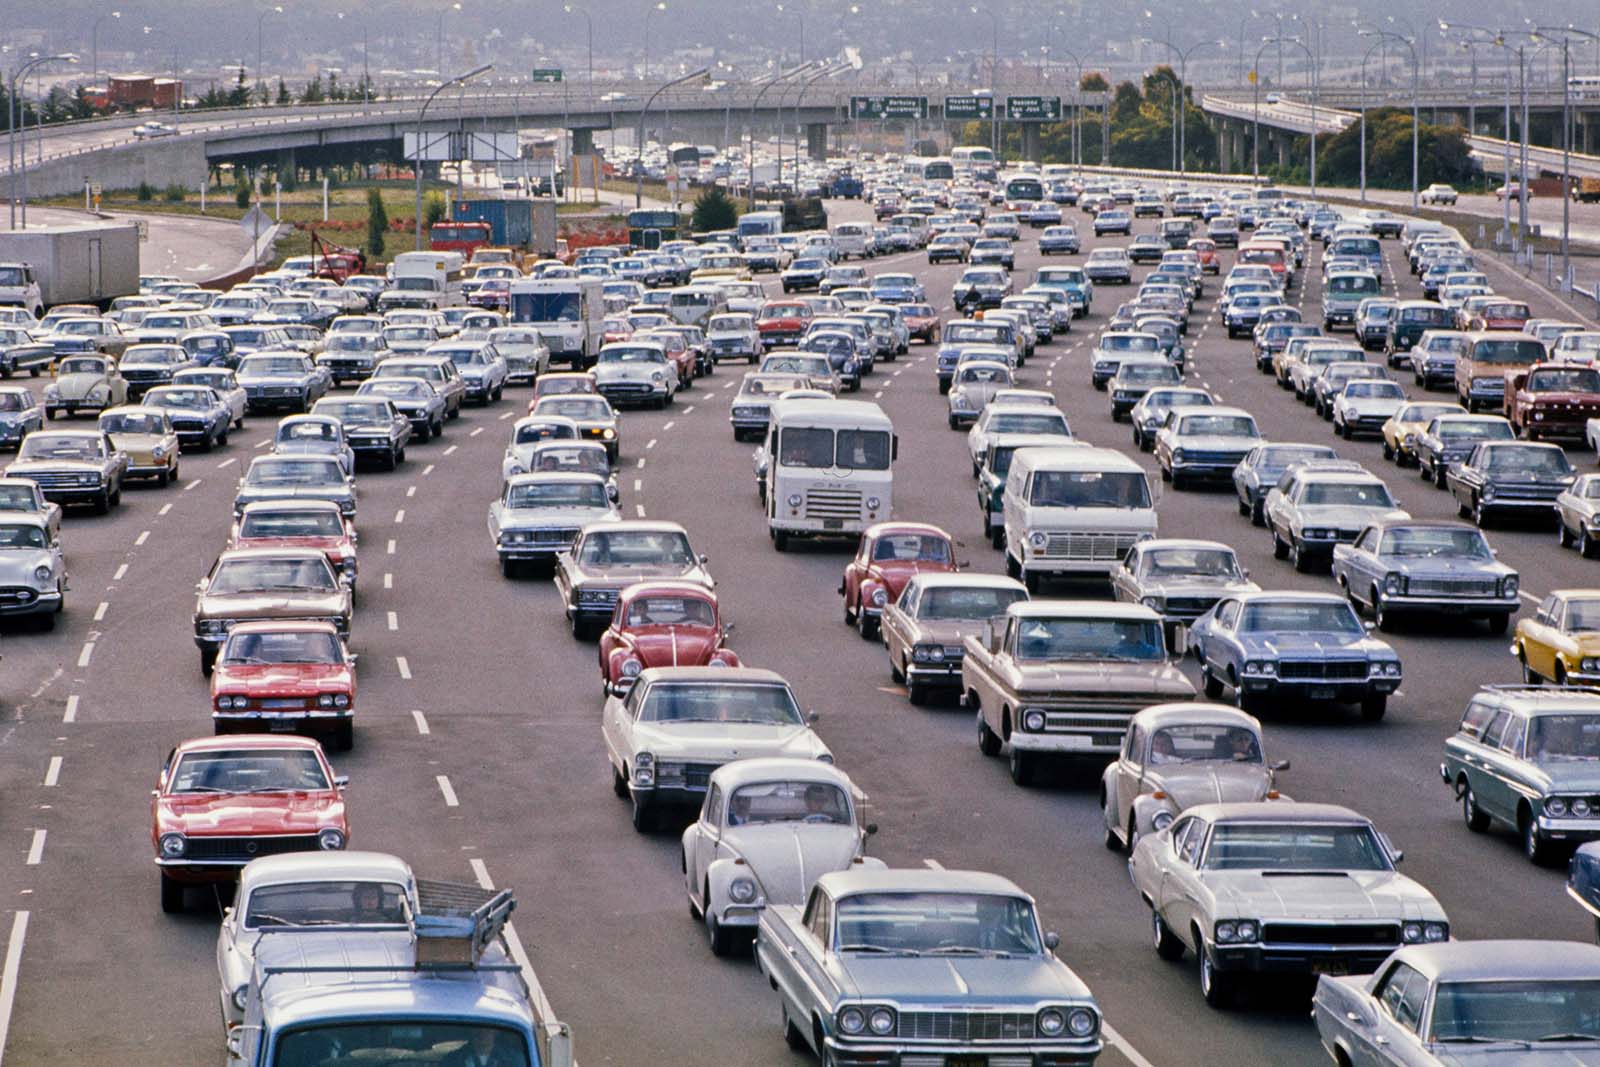 From the archive: When American cars swapped muscle for MPG